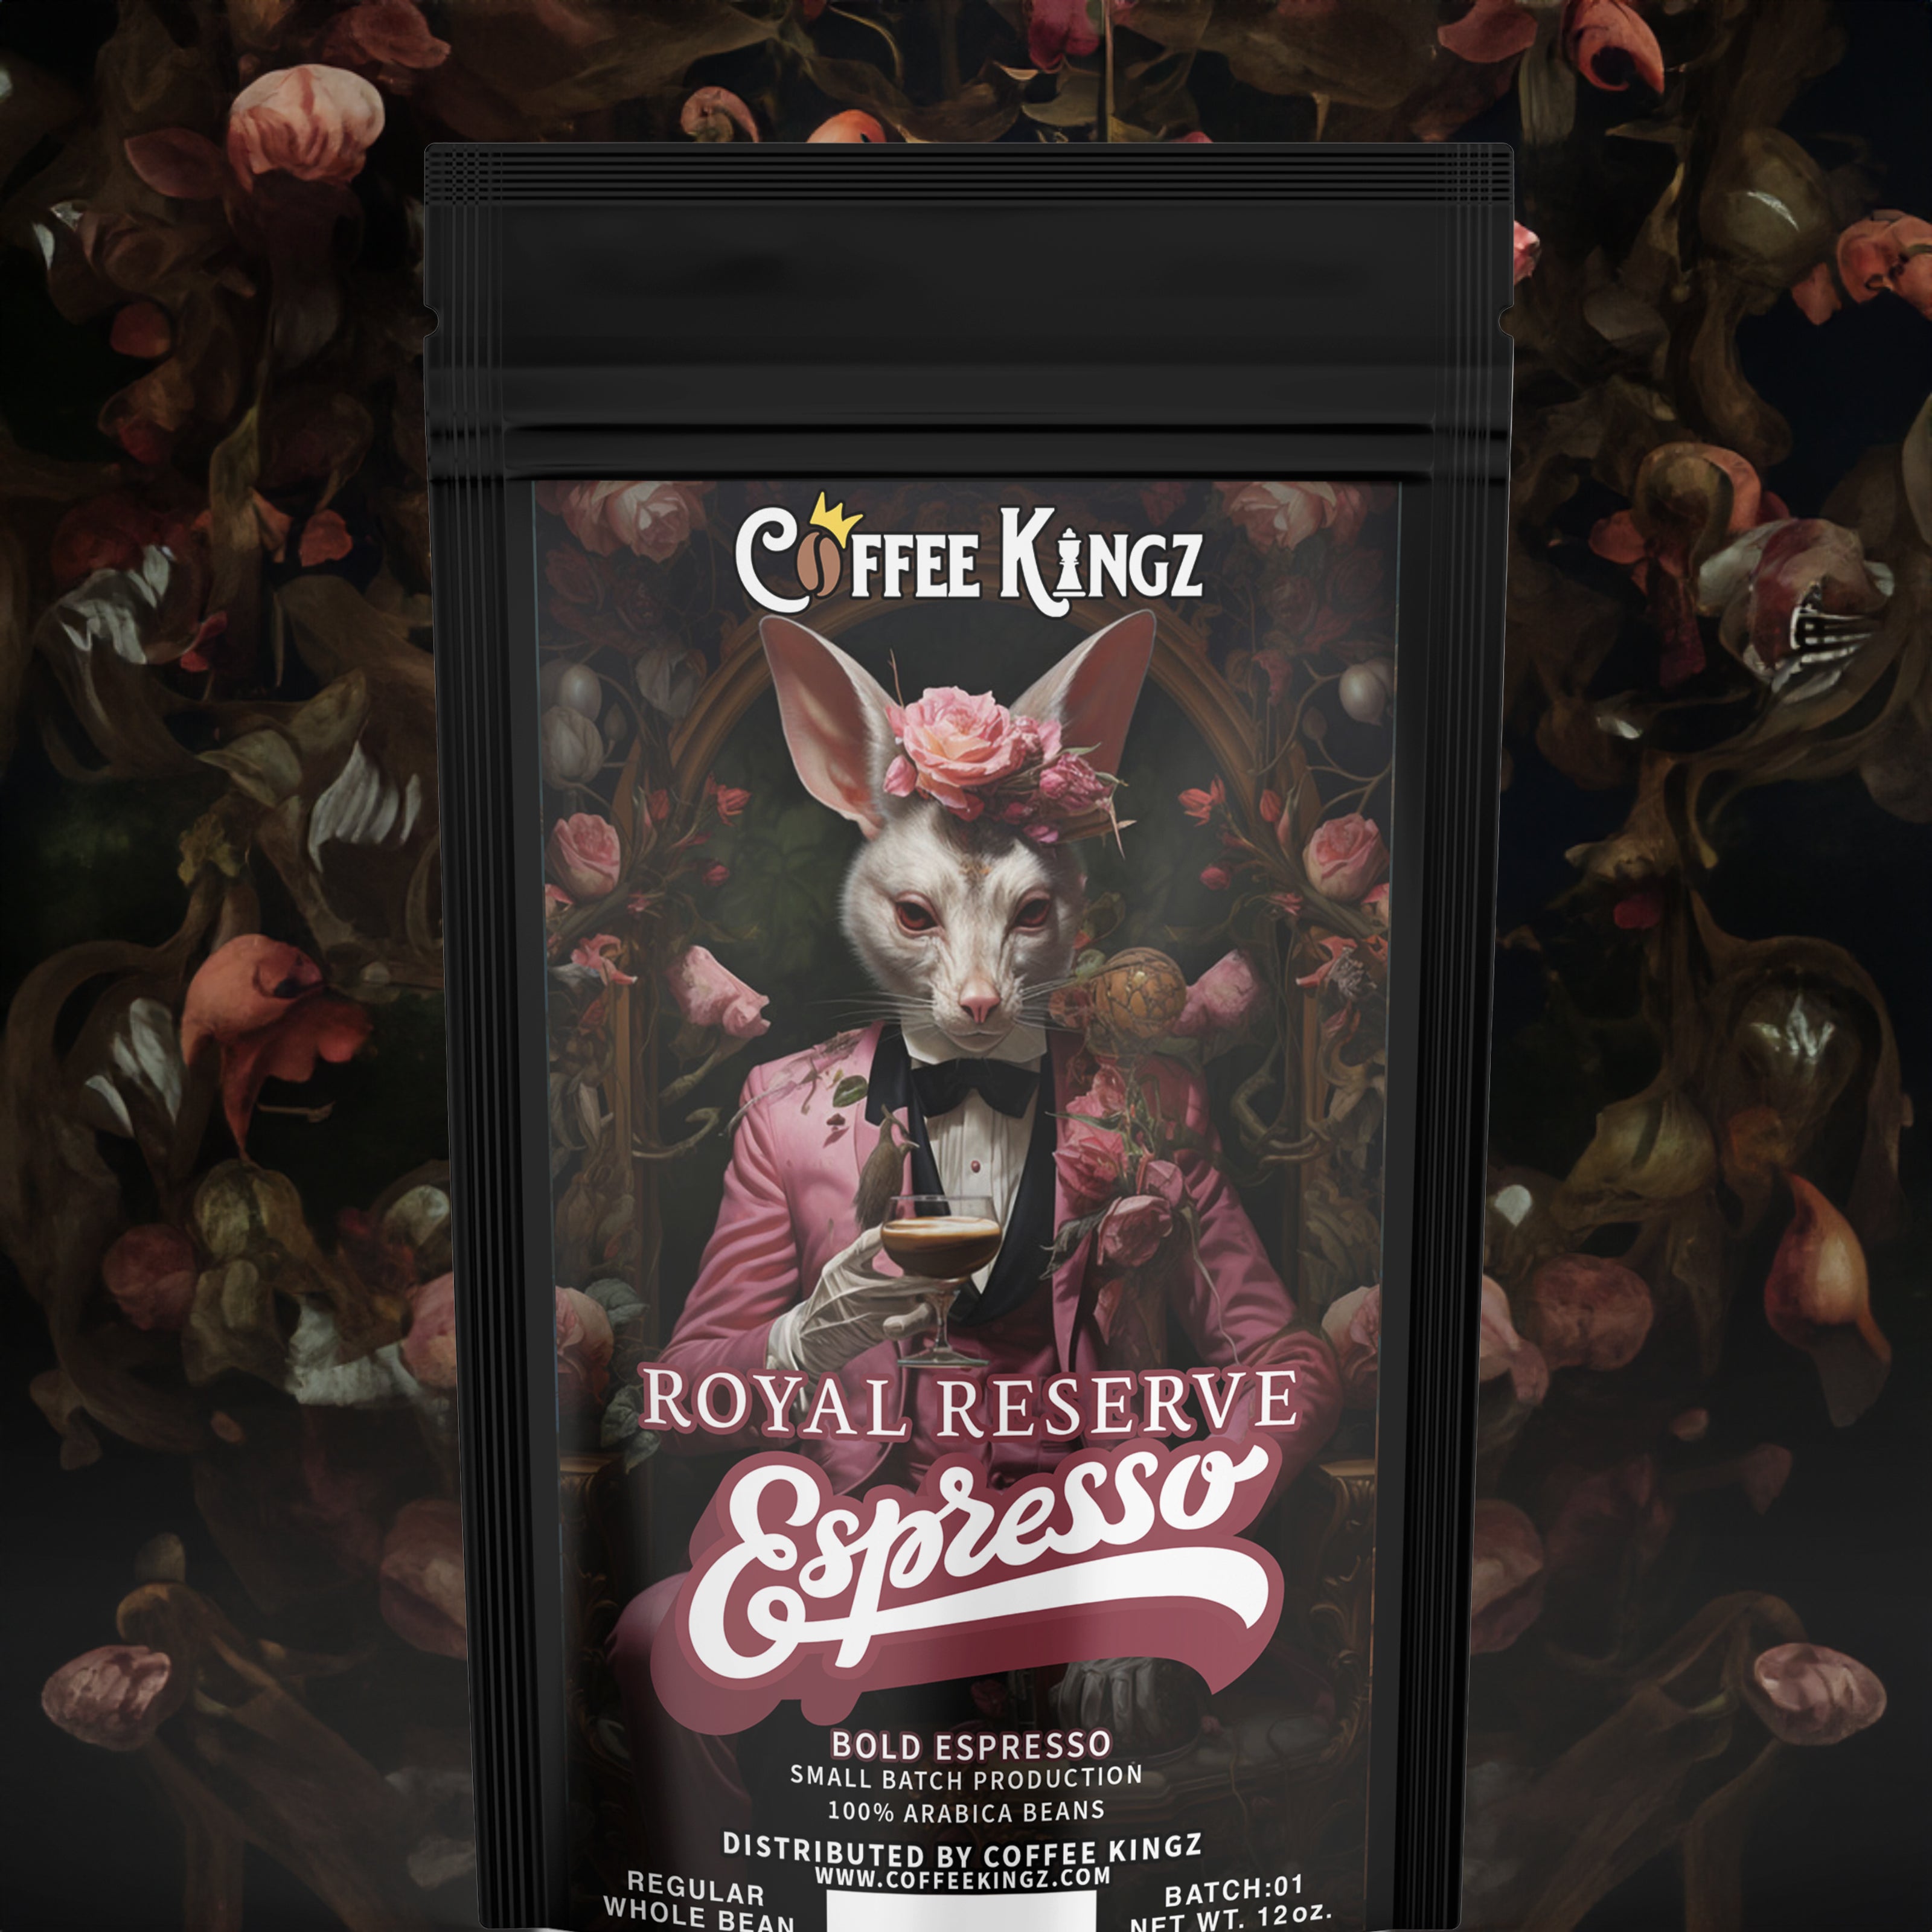 A regal package of Coffee Kingz royal reserve espresso featuring an anthropomorphized fox dressed in royal attire against a dark, floral backdrop, promising a bold espresso experience from a small batch production.